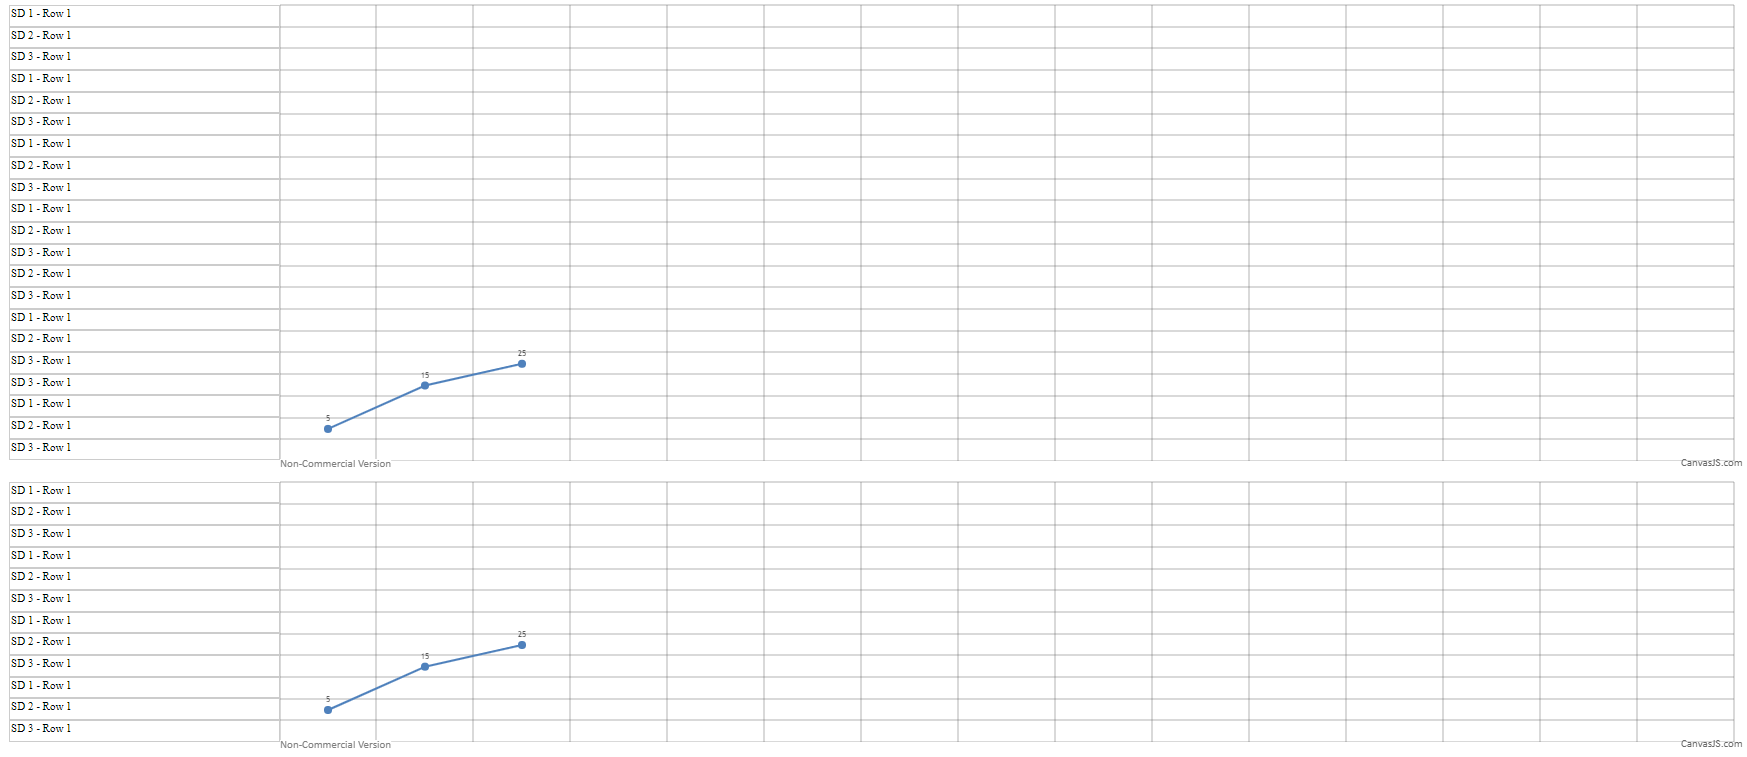 Aligning chart with table